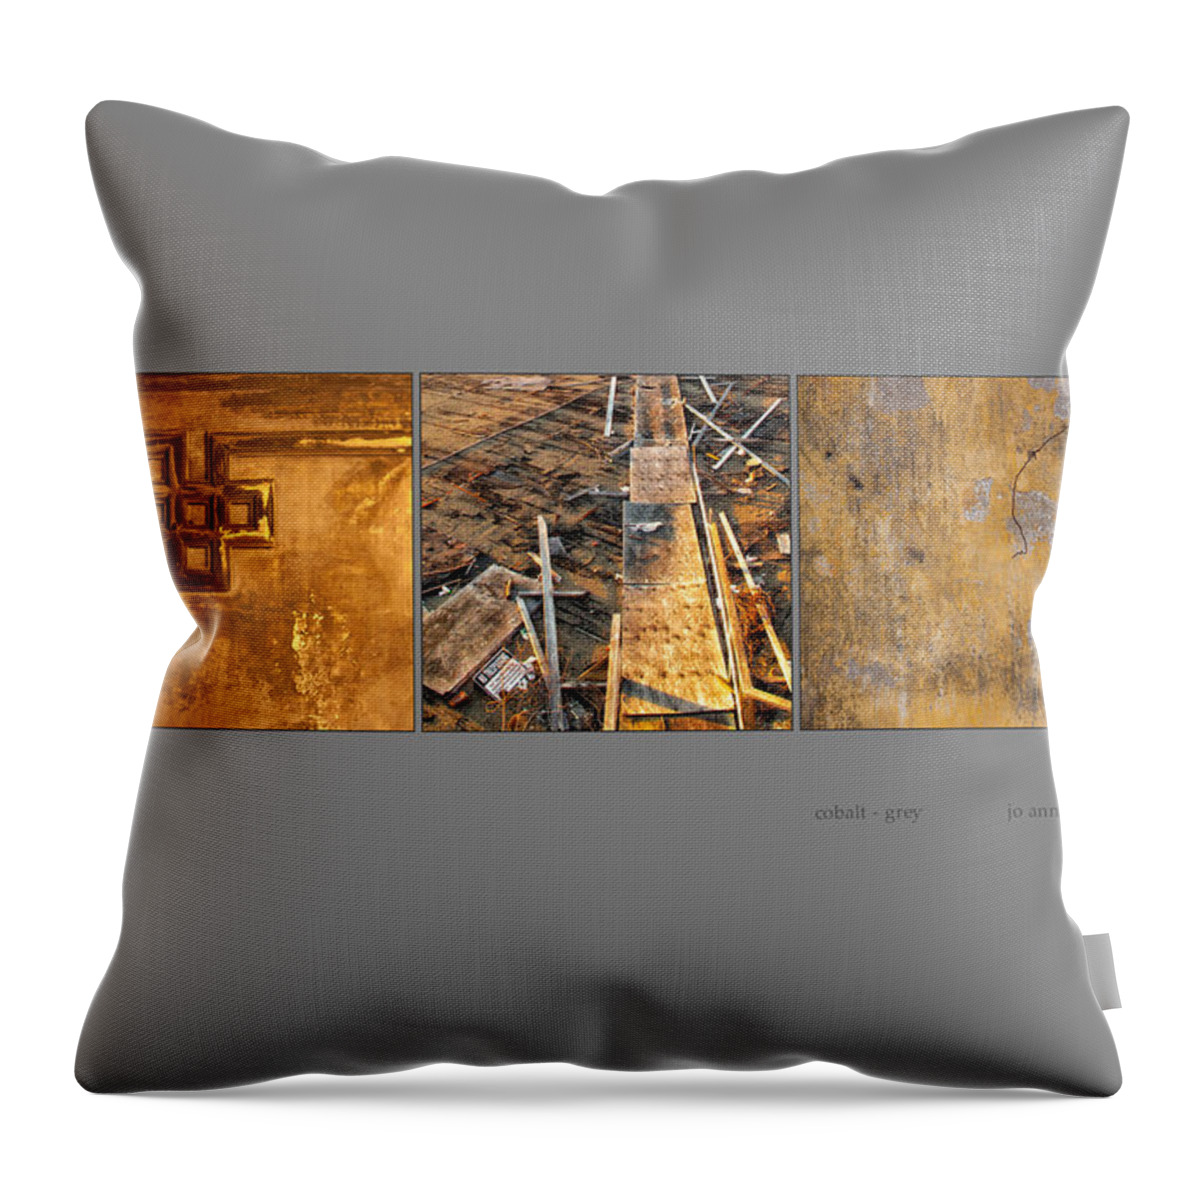 Tryptich Throw Pillow featuring the photograph Cobalt Grey Triptych Image Art by Jo Ann Tomaselli